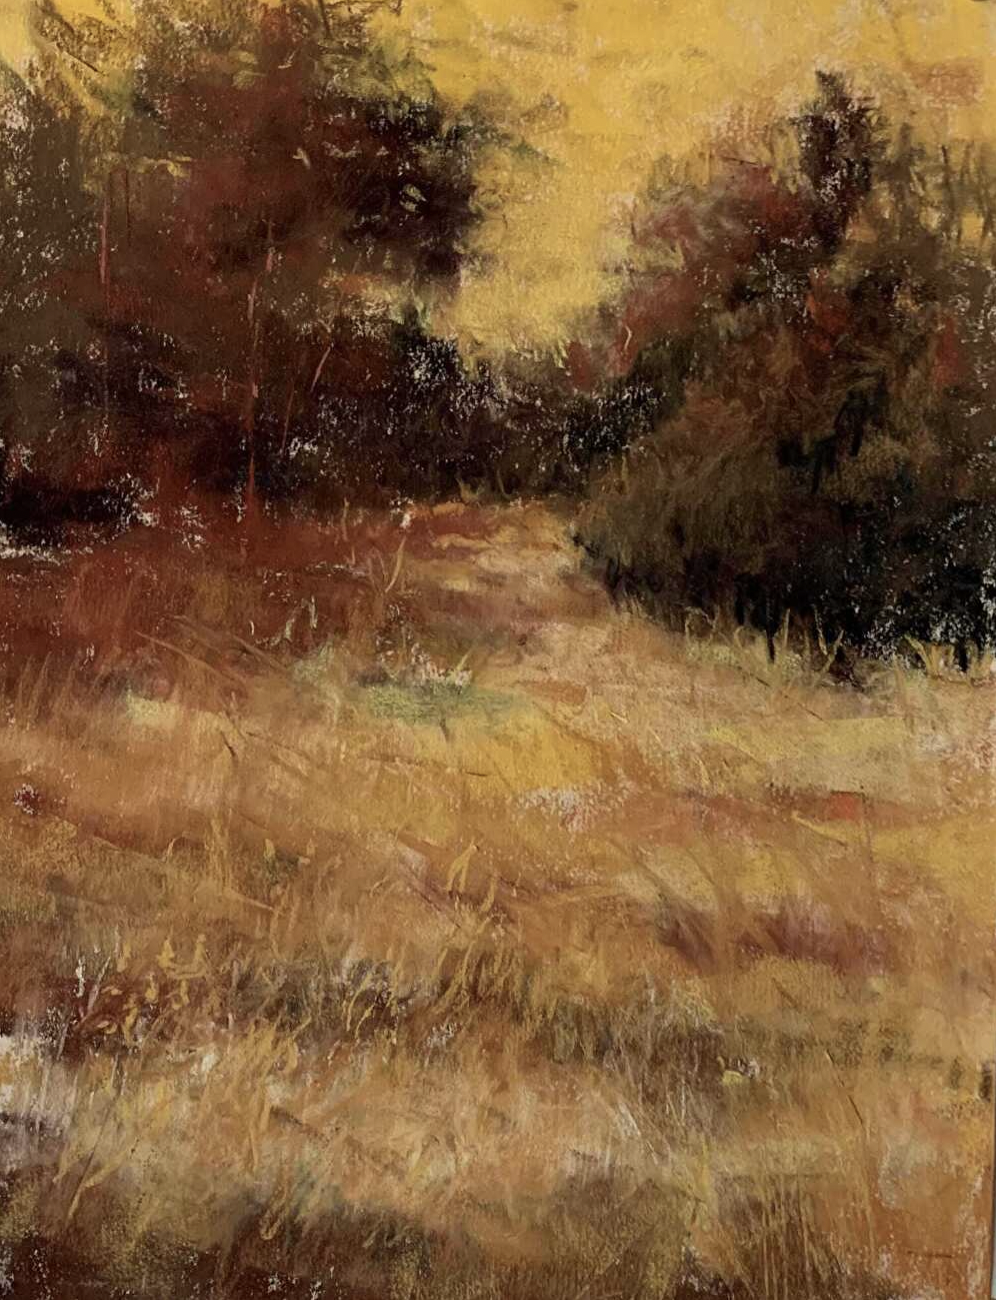 Autumn paintings - Tom Bailey, "Caramels," pastel, 12 x 9 in